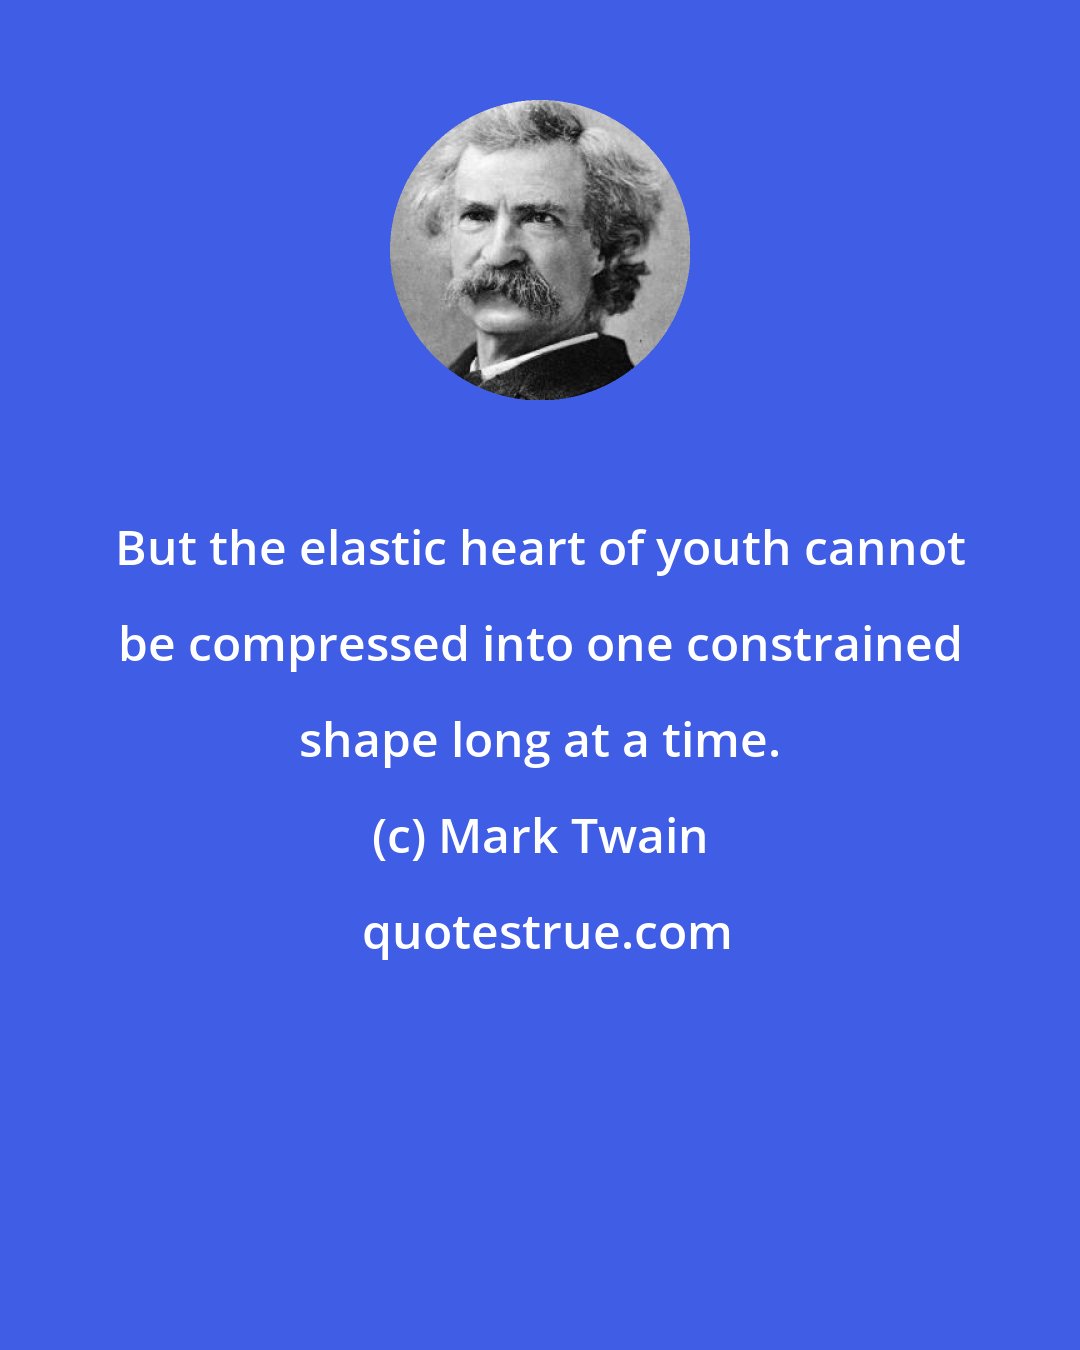 Mark Twain: But the elastic heart of youth cannot be compressed into one constrained shape long at a time.